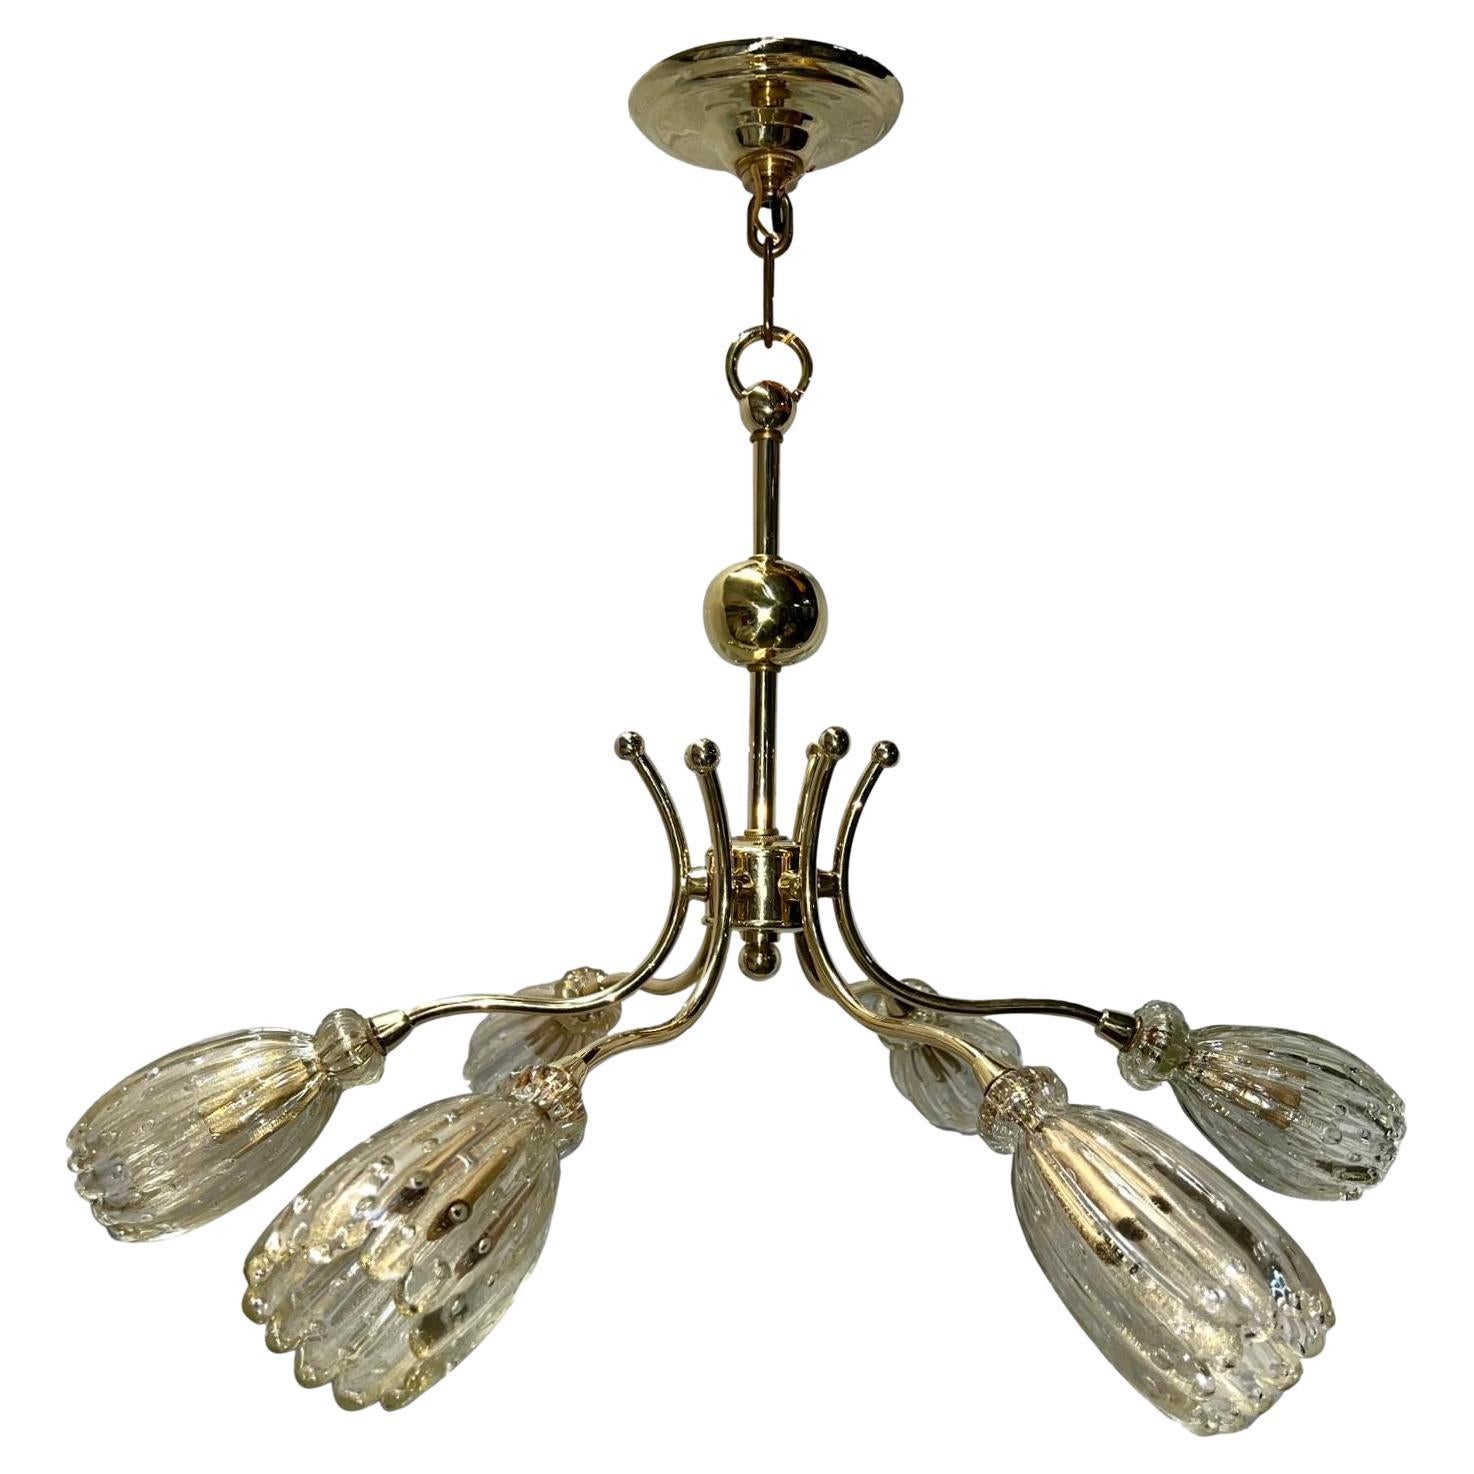 Set of Italian Moderne Chandeliers, Sold Individually